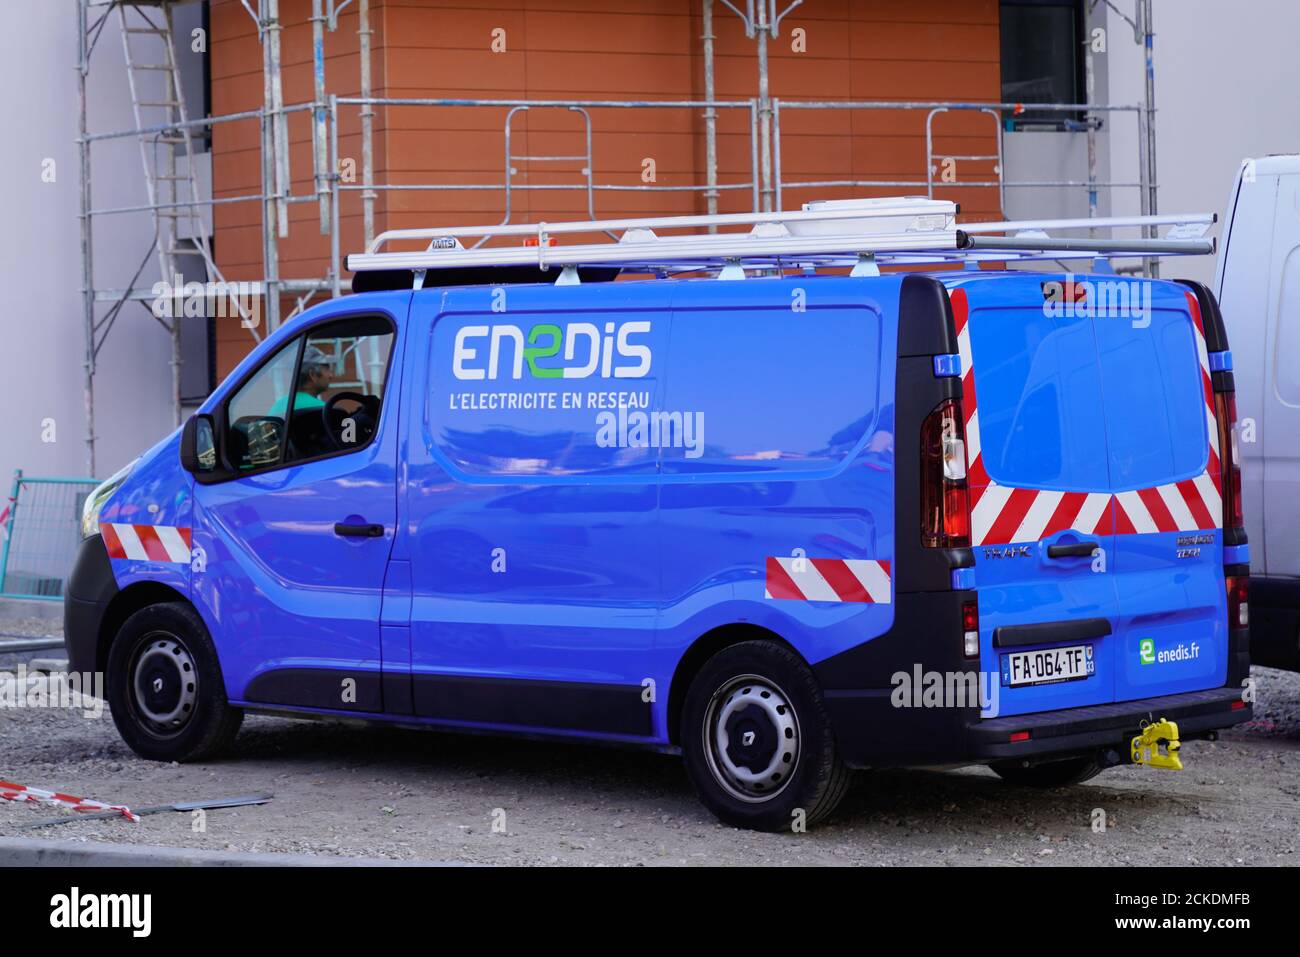 Bordeaux , Aquitaine / France - 09 01 2020 : ENEDIS edf logo and text sign  on blue van truck of french electricity provider distribution company Stock  Photo - Alamy